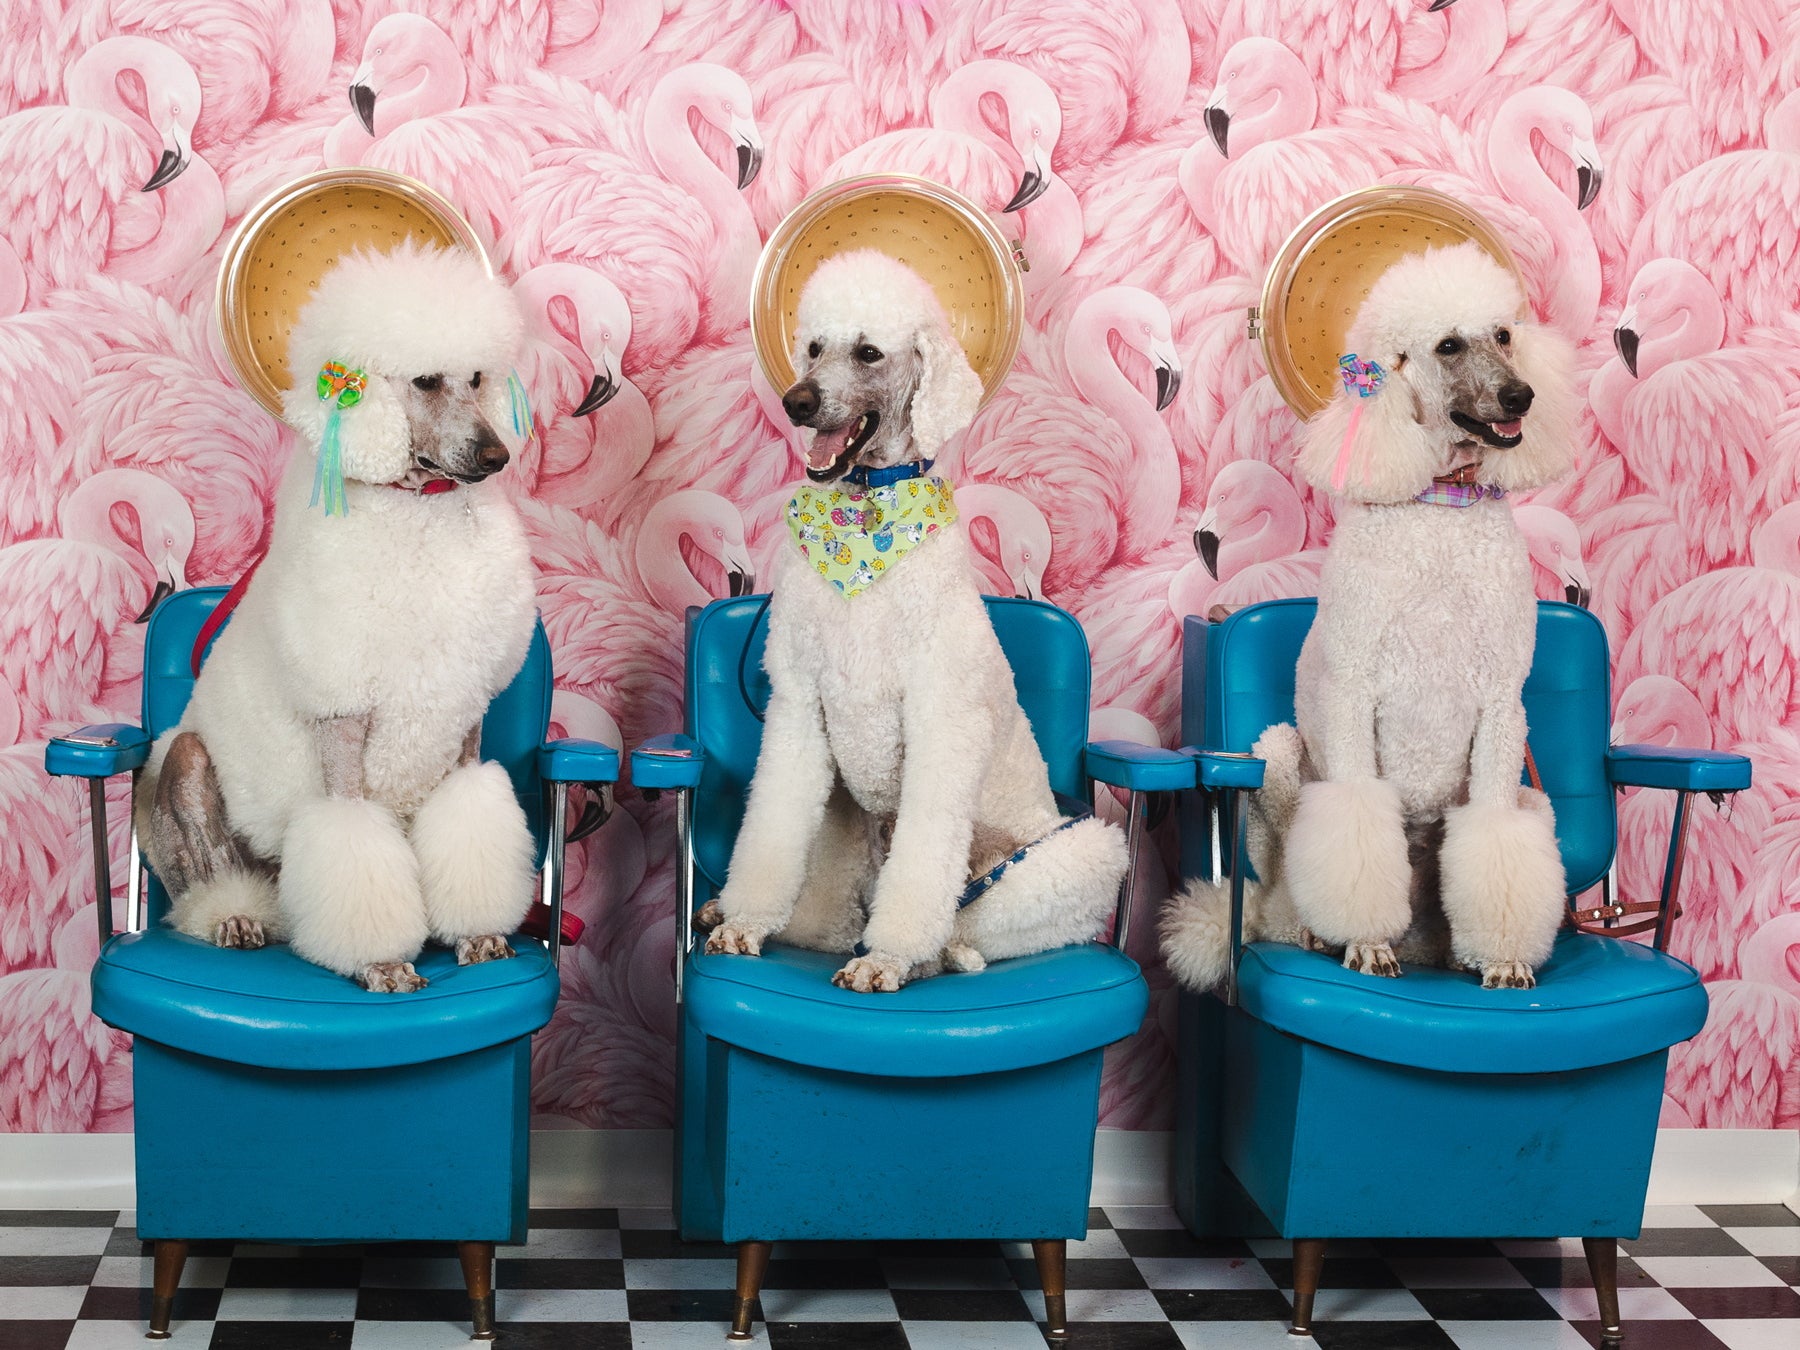 The Vetster Salon posed these poodles